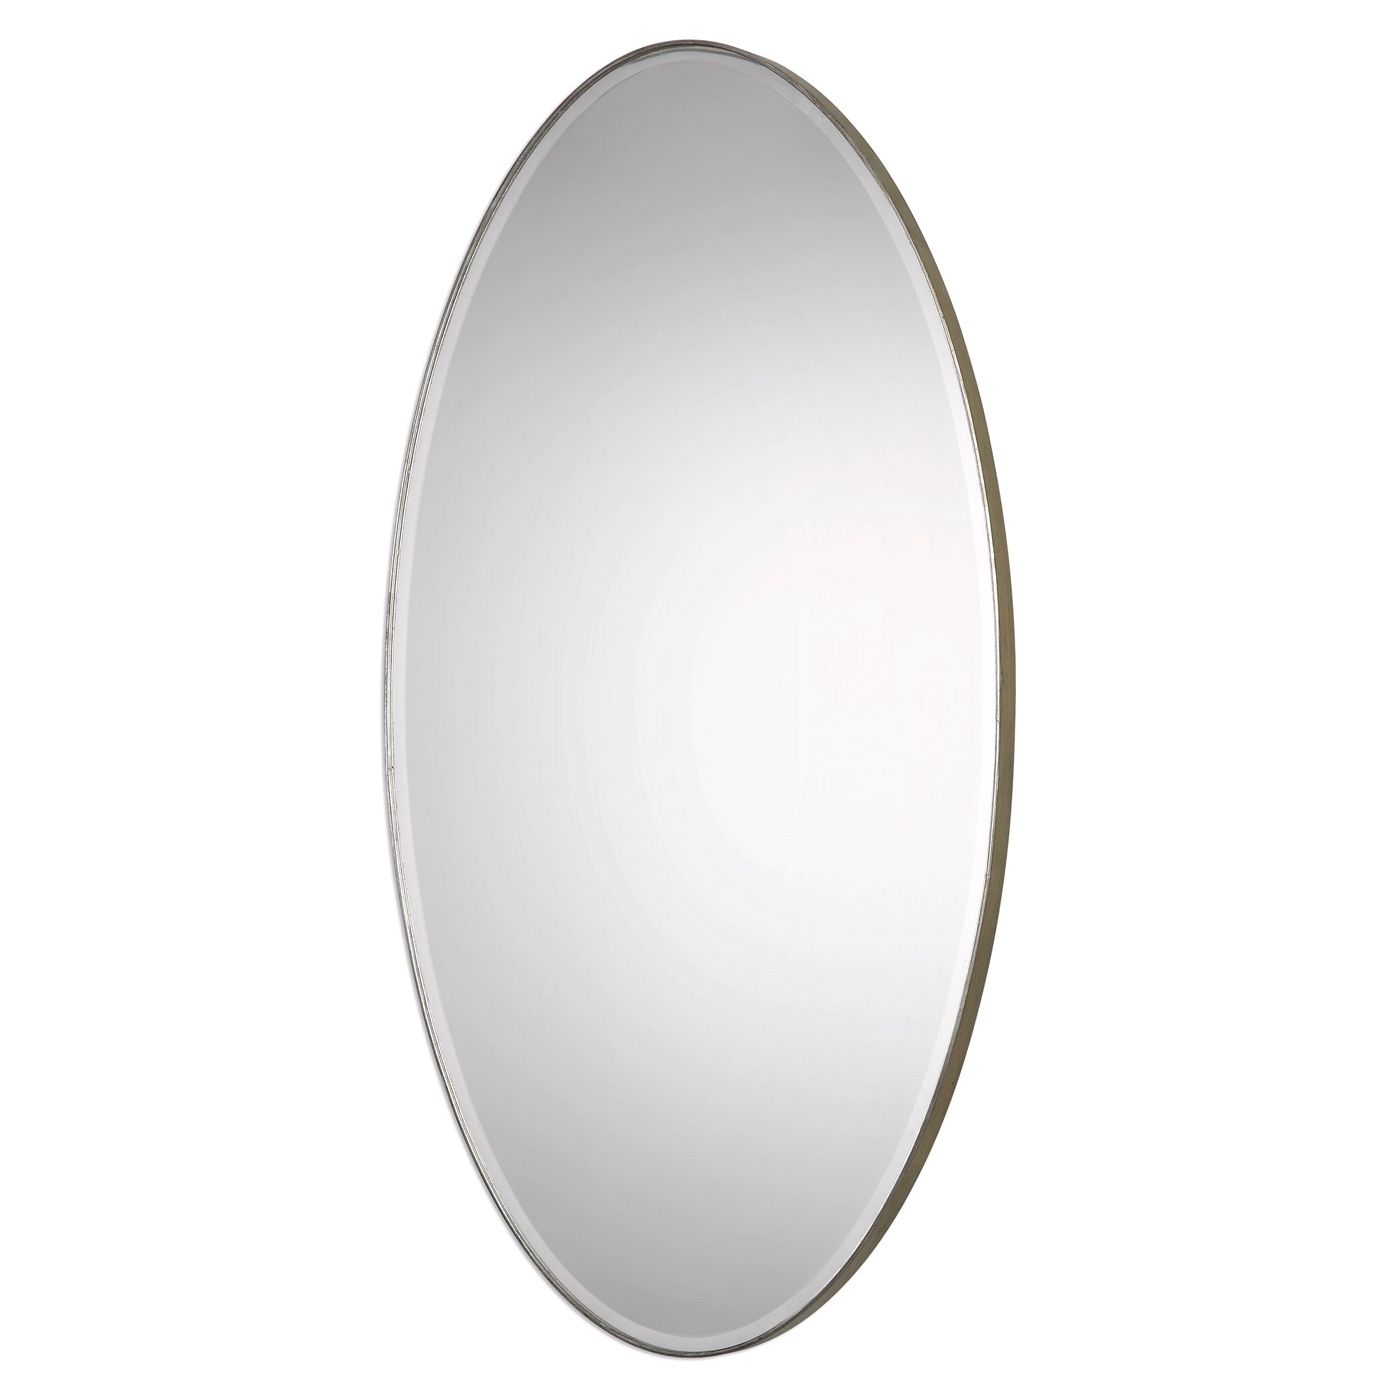 Chic Petra Large Oval Wall Mirror With Iron Frame In Silver Leaf Finish With Iron Frame Handcrafted Wall Mirrors (View 14 of 15)